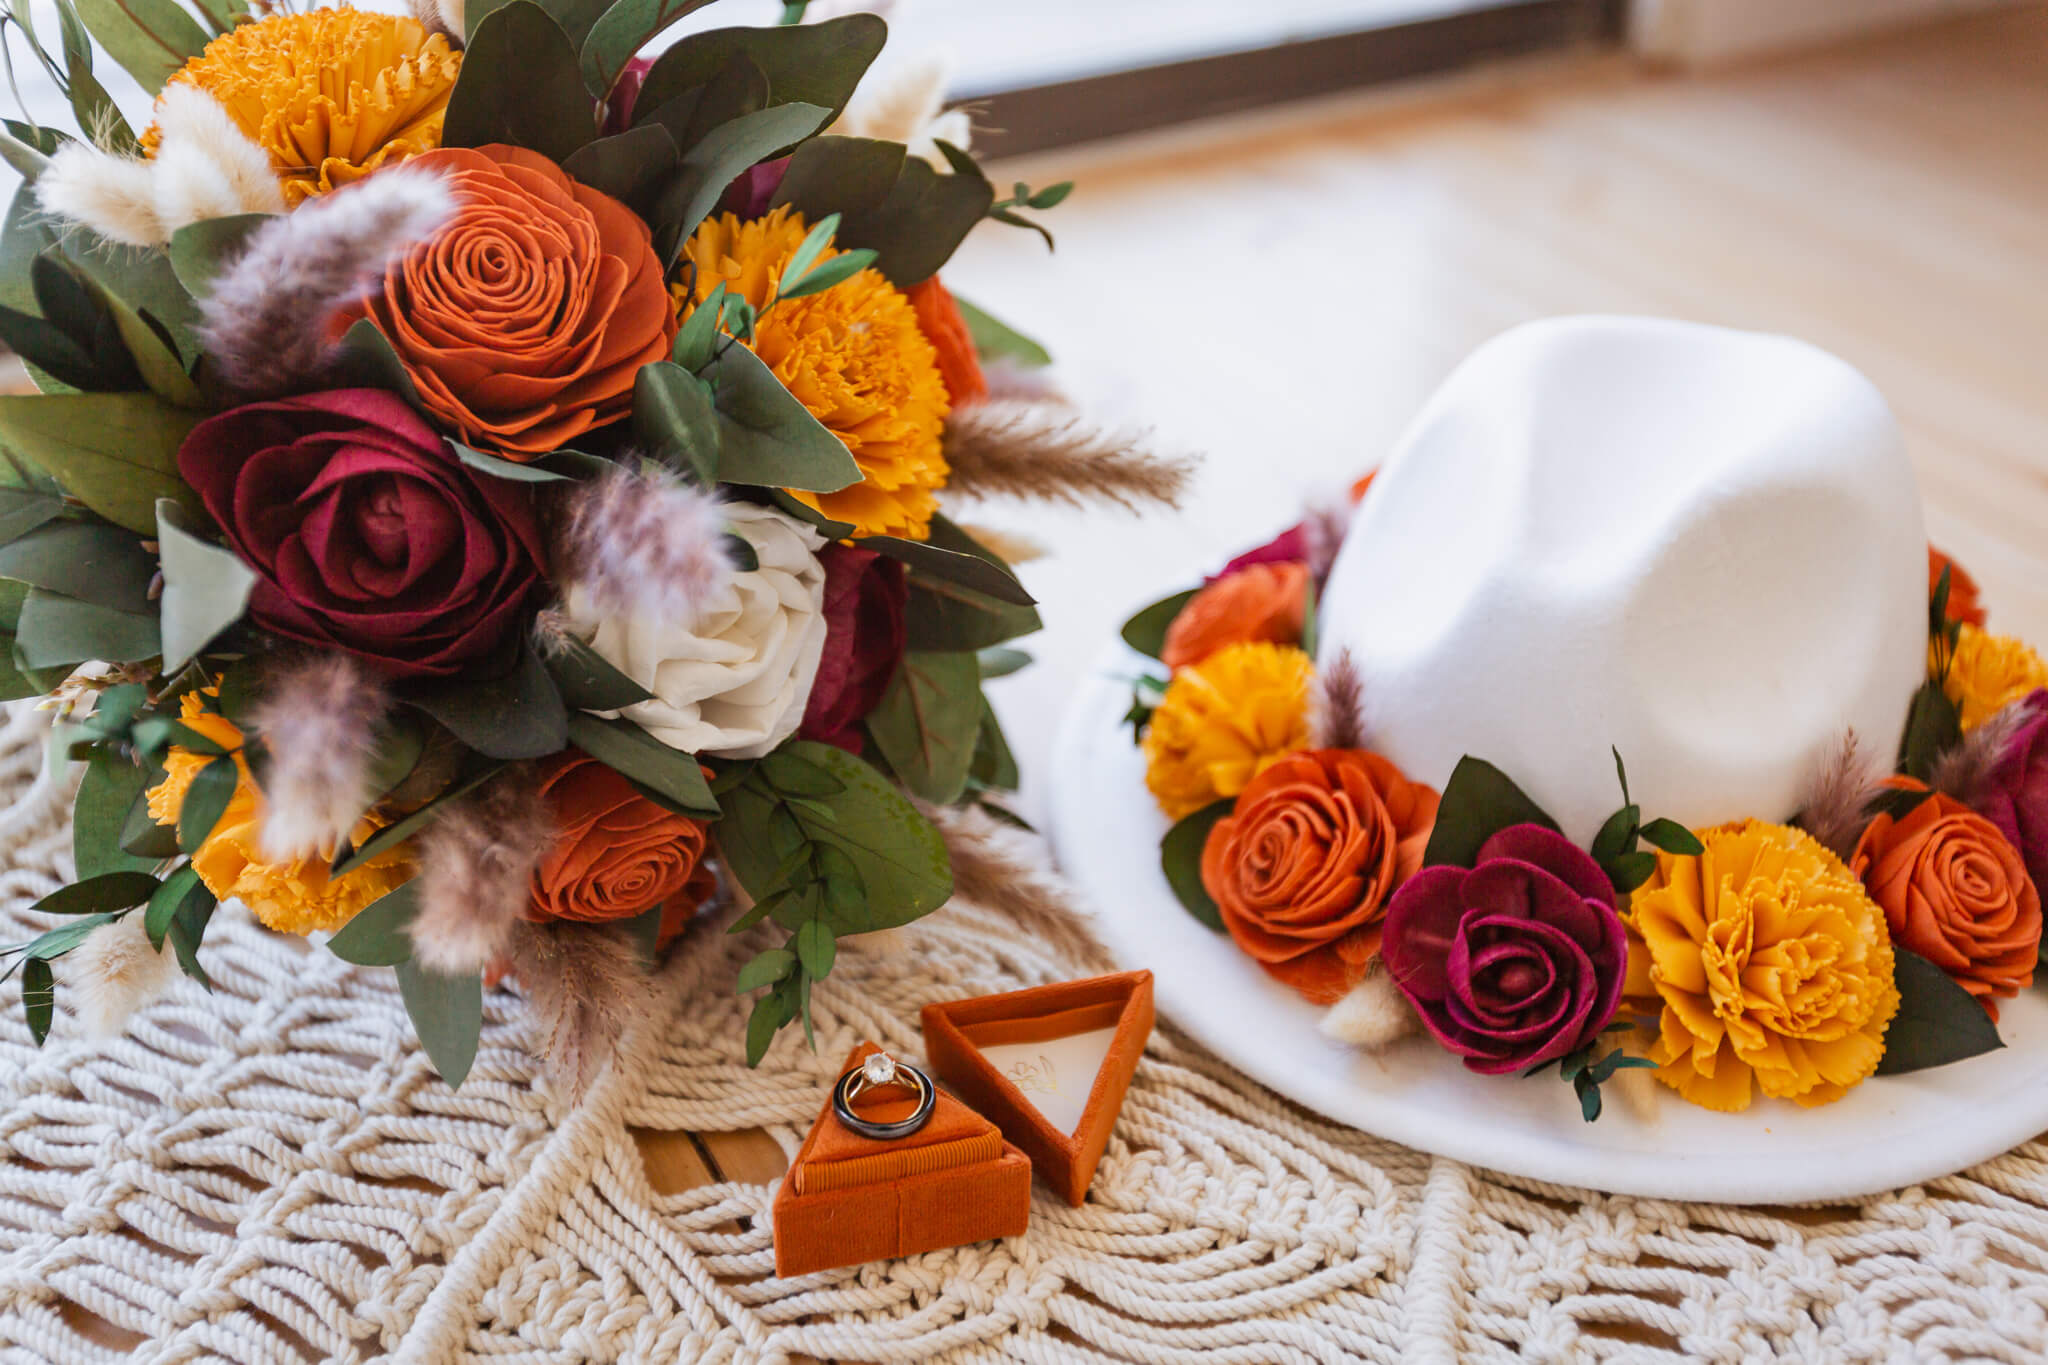 Wedding details: Bride's bouquet, ring, and hat